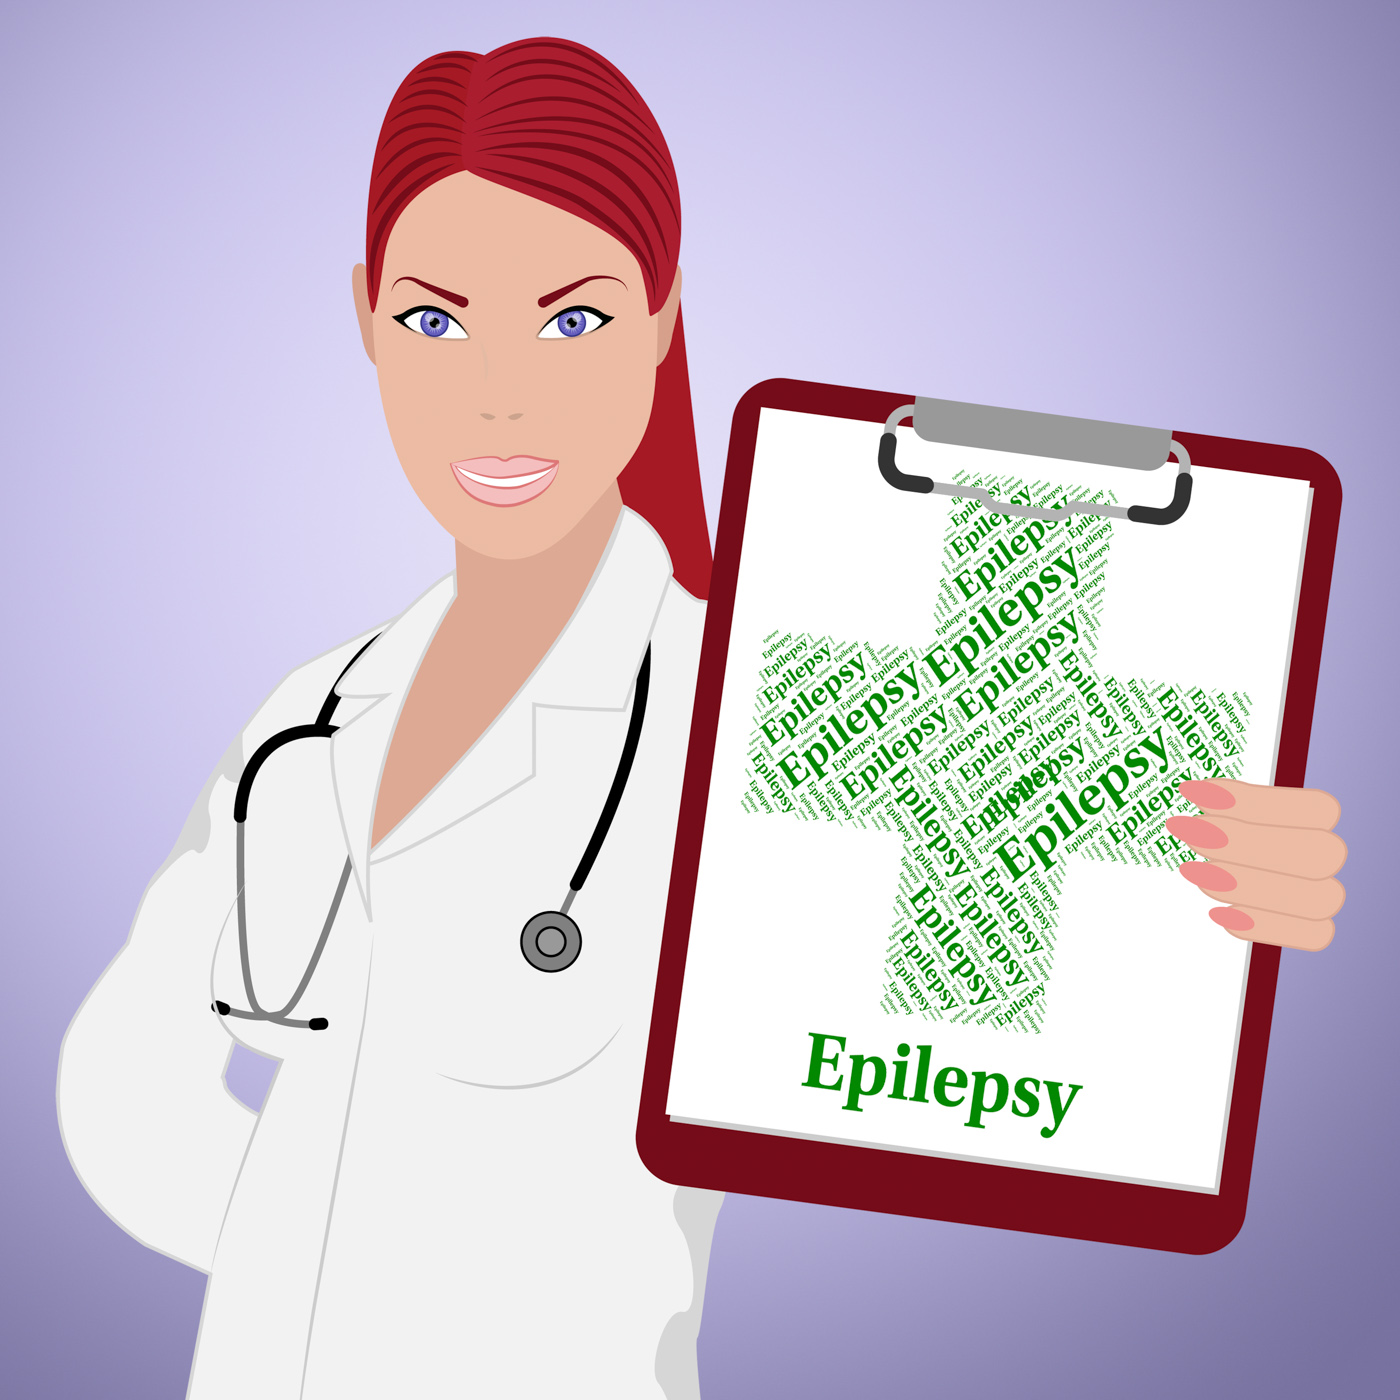 Epilepsy word represents poor health and ailment photo